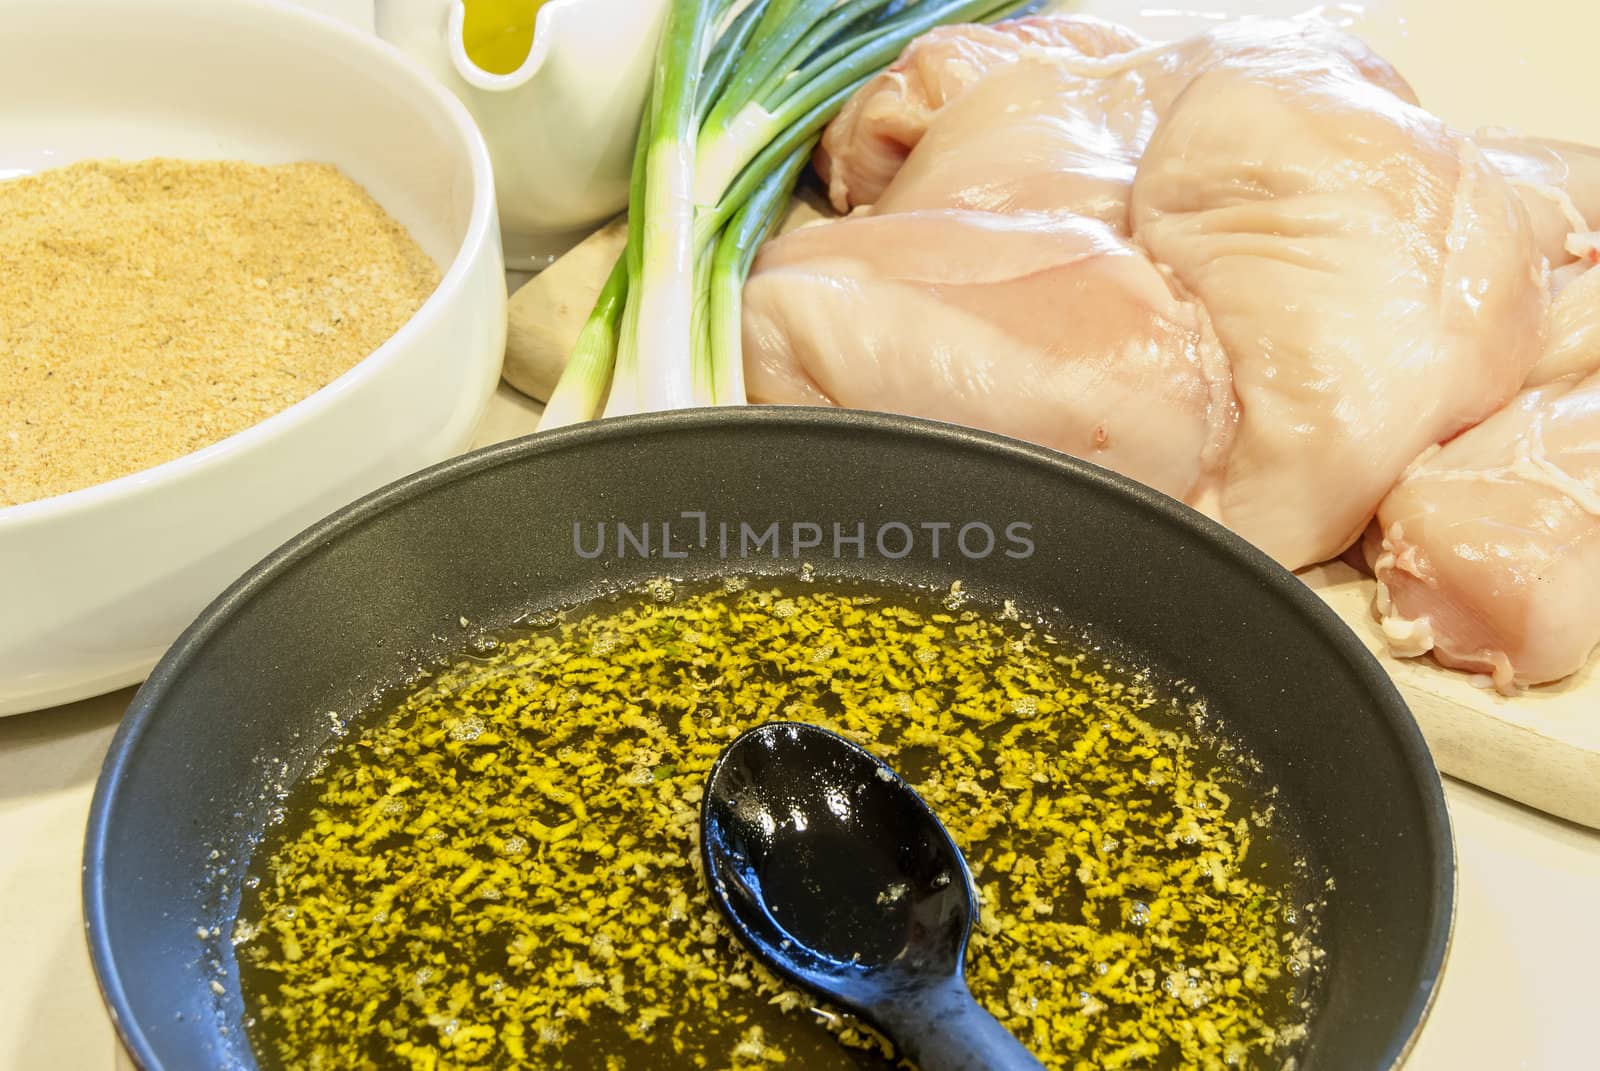 Ingredients for the preparation of breaded fried chicken